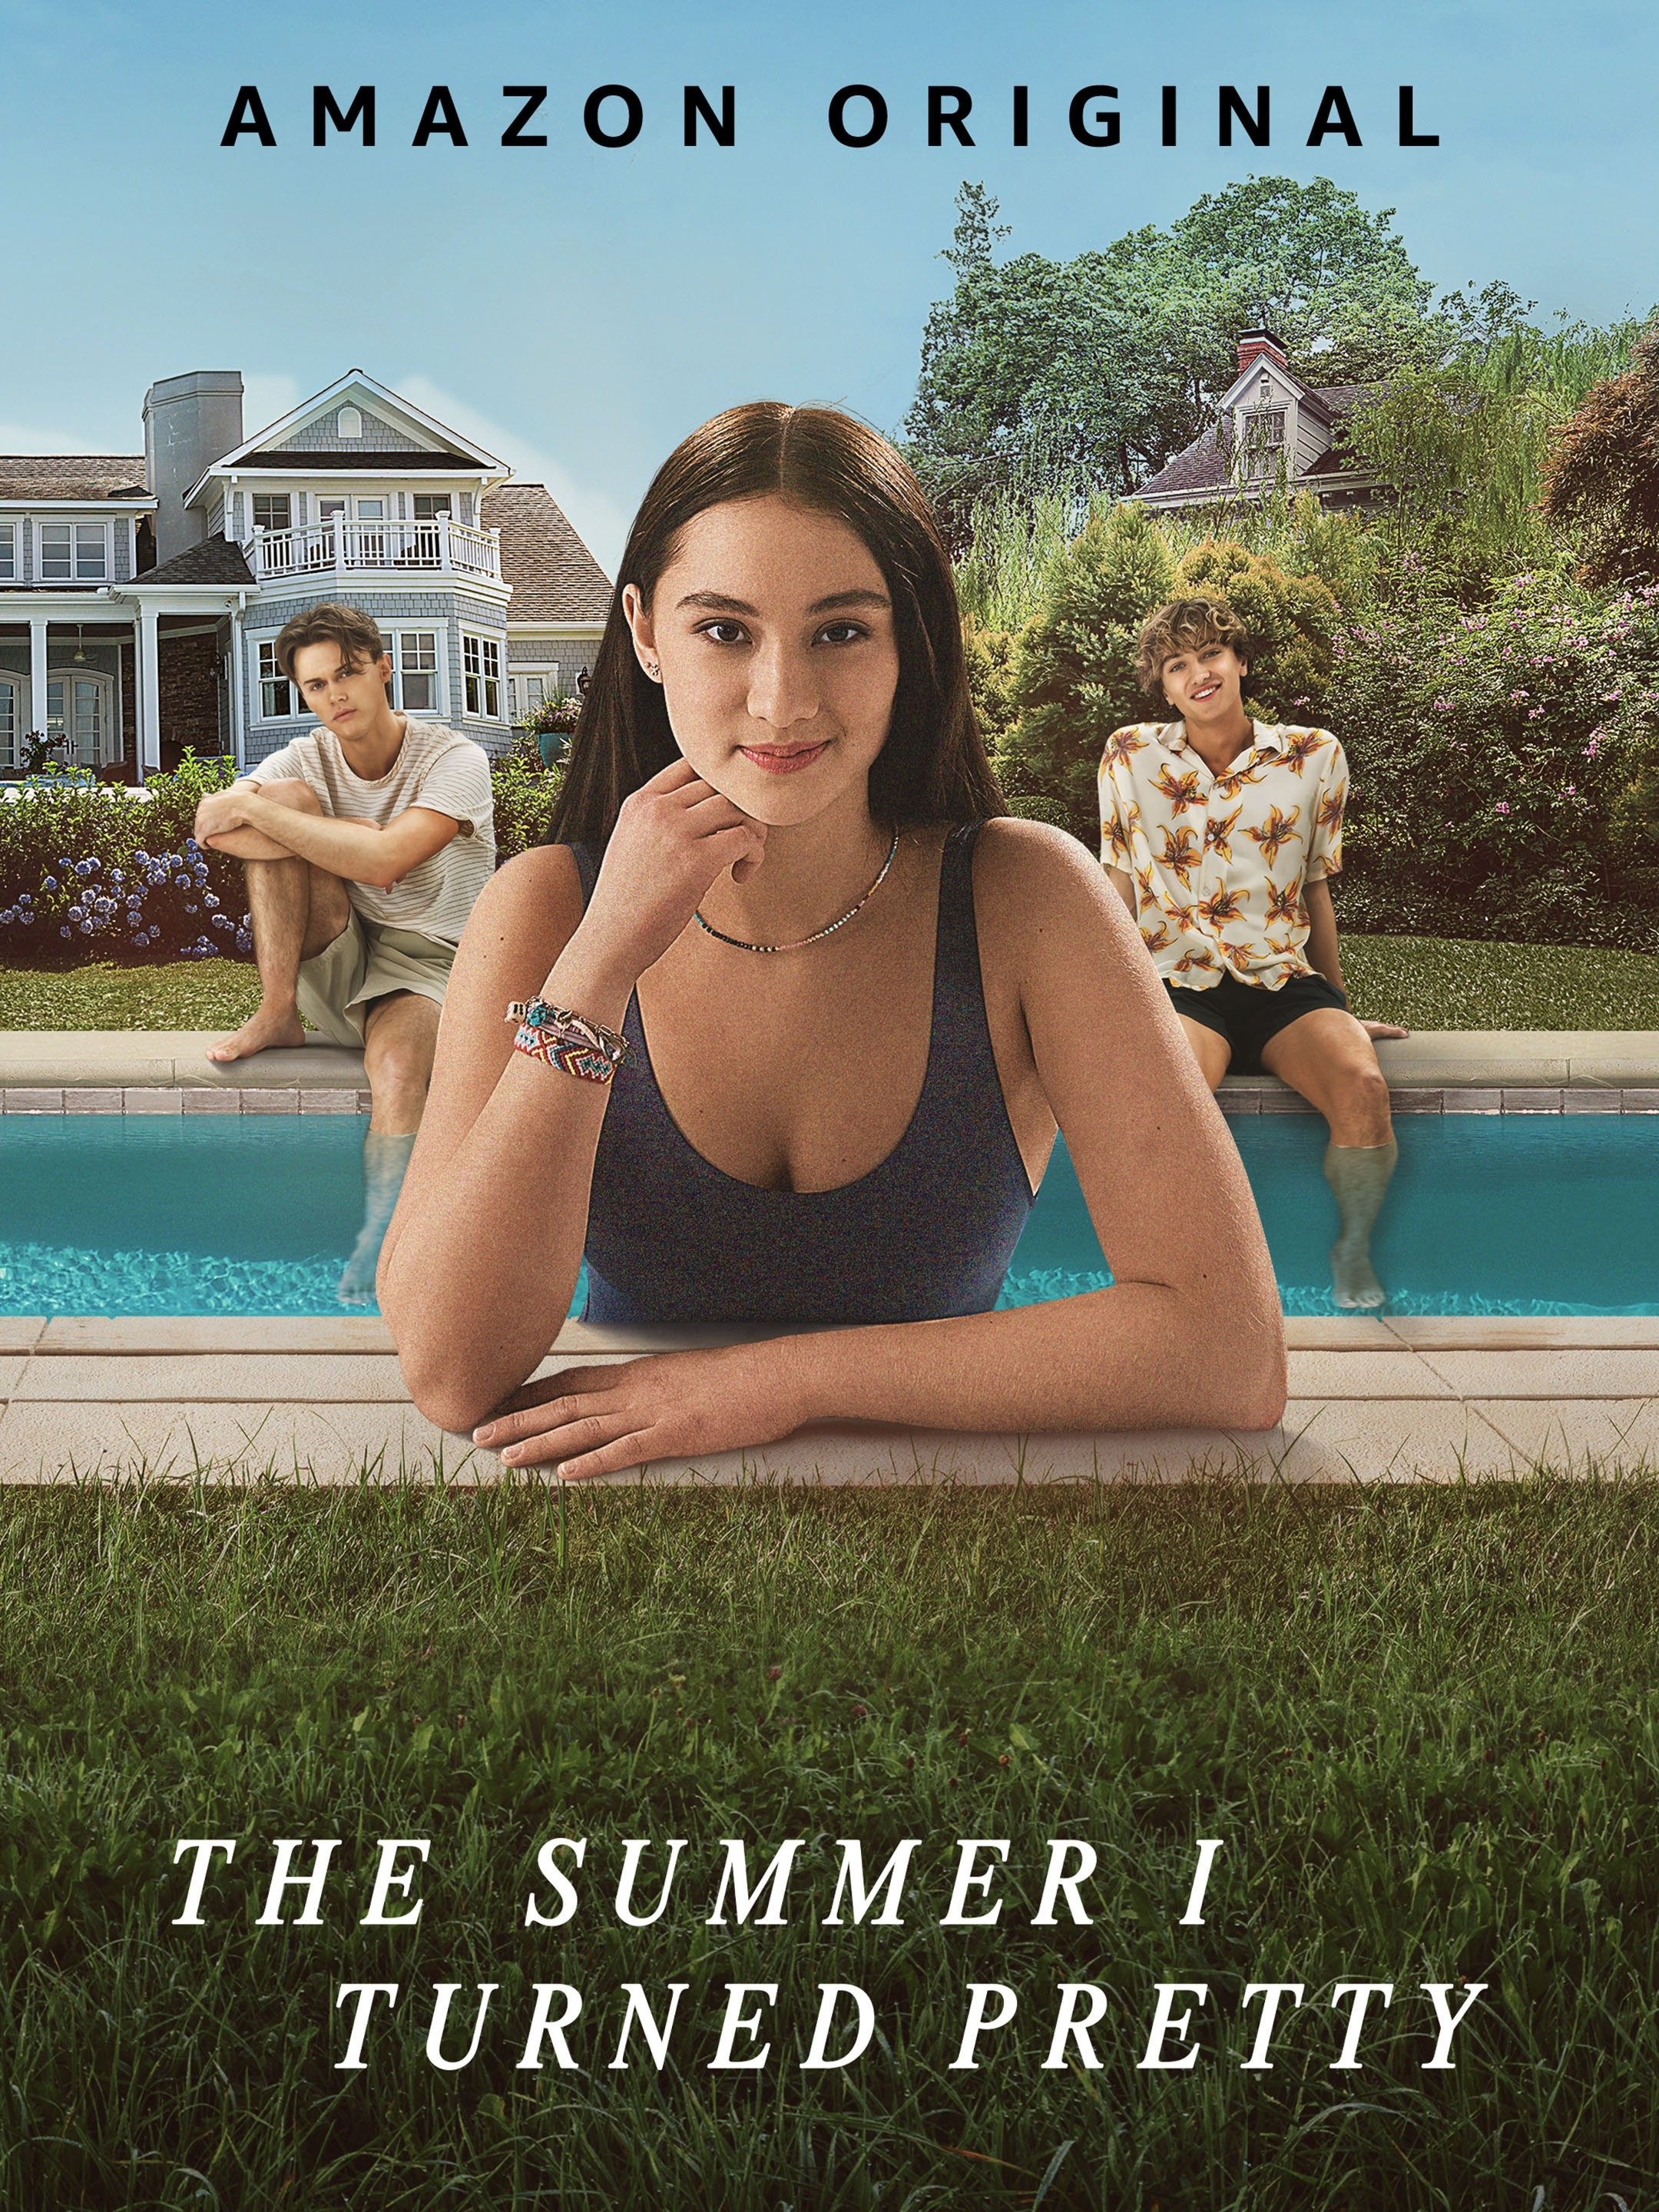 6 Shows Like The Summer I Turned Pretty to Watch if You Like The